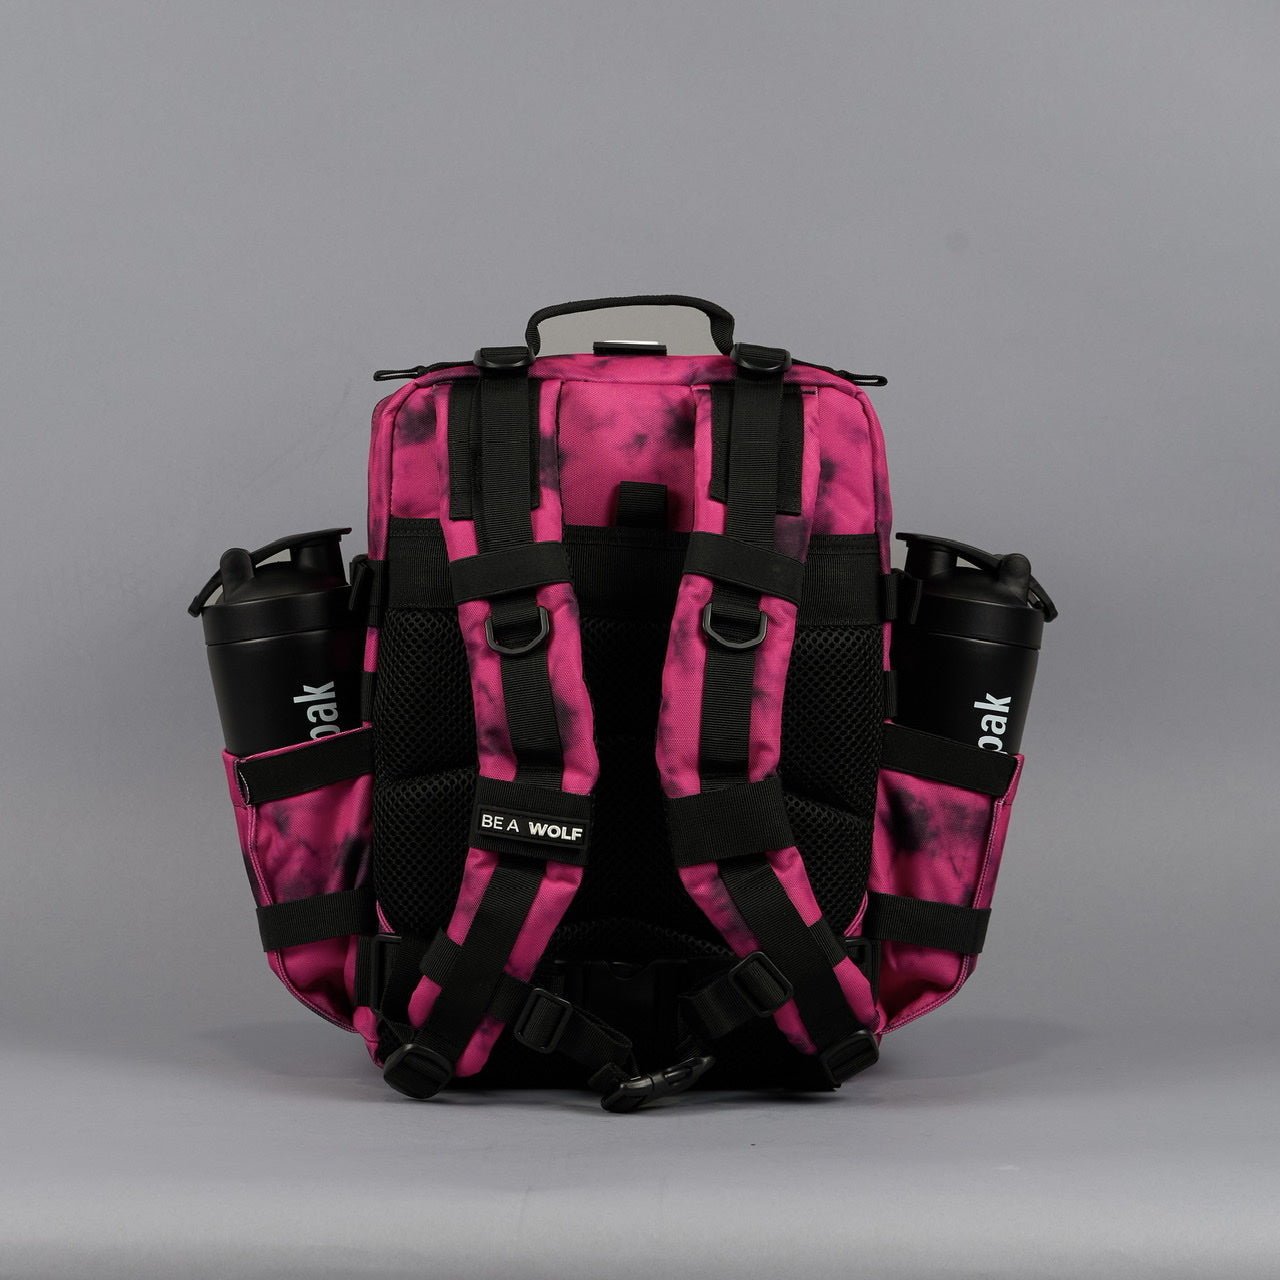 25L Backpack Toxic Pink